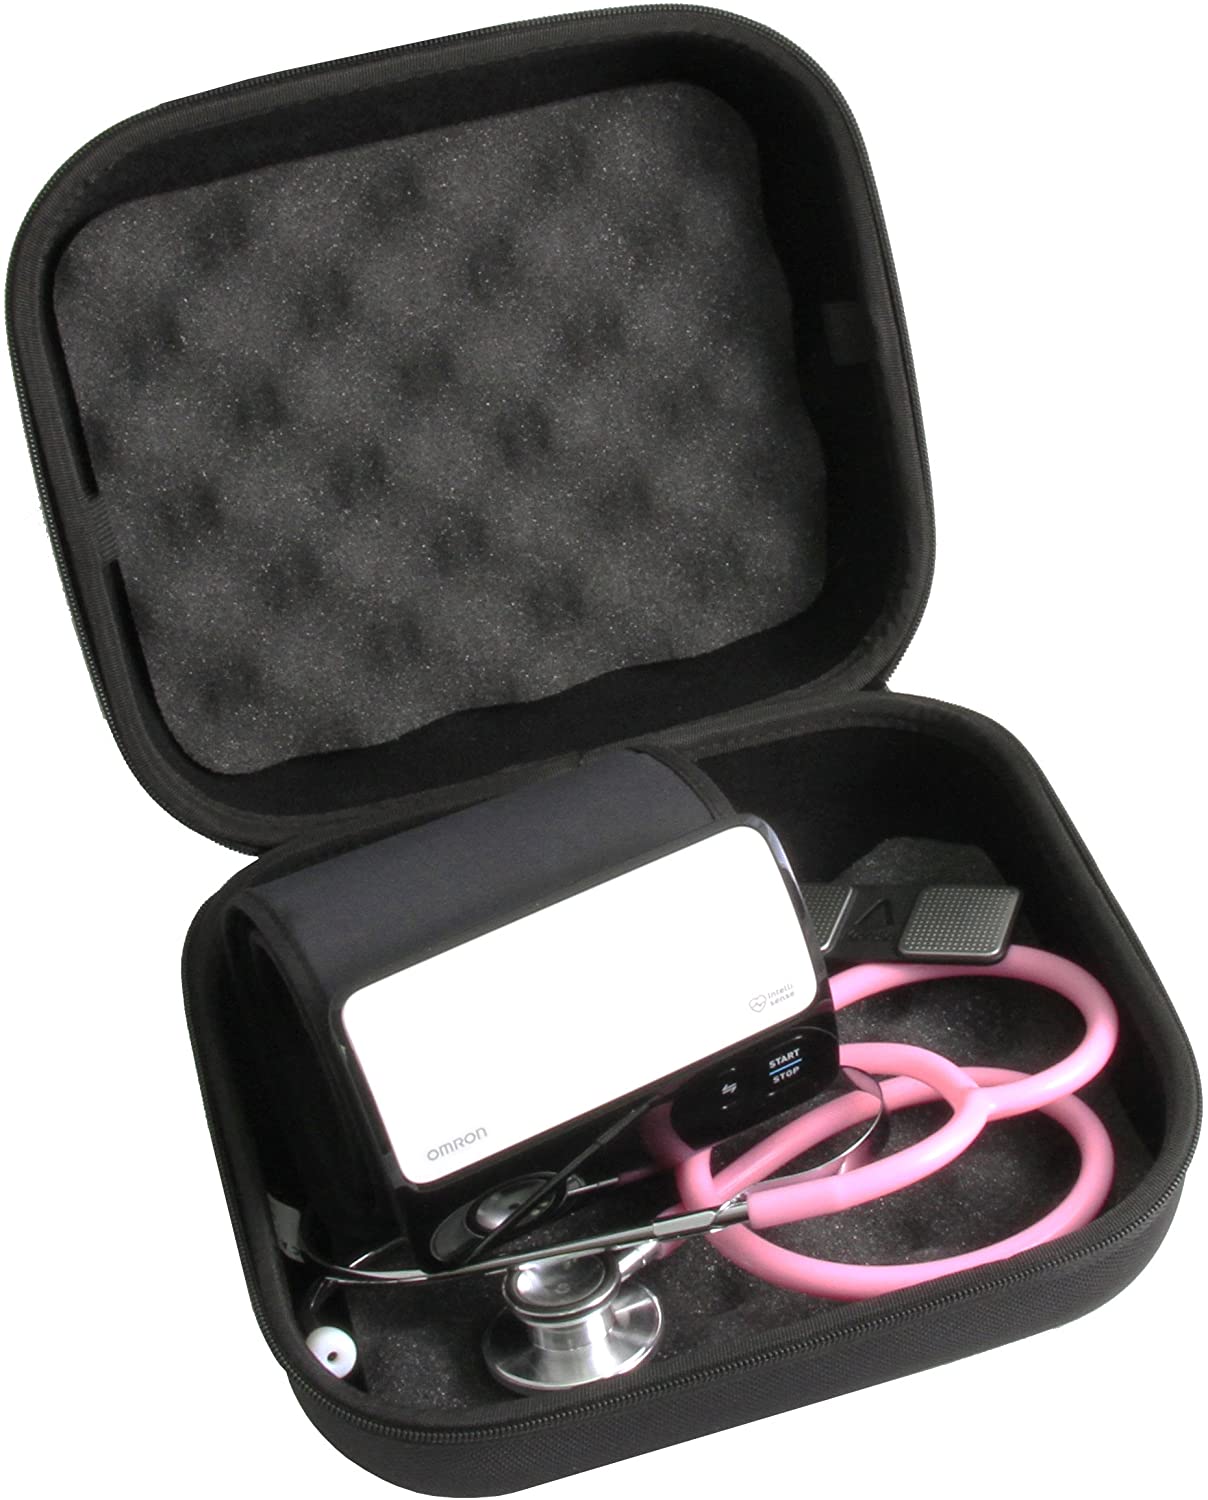 Oxiline Pressure X PRO Bluetooth , Automatic Upper Arm Machine & Accurate  Adjustable Digital BP Cuff Kit, Carrying Case 